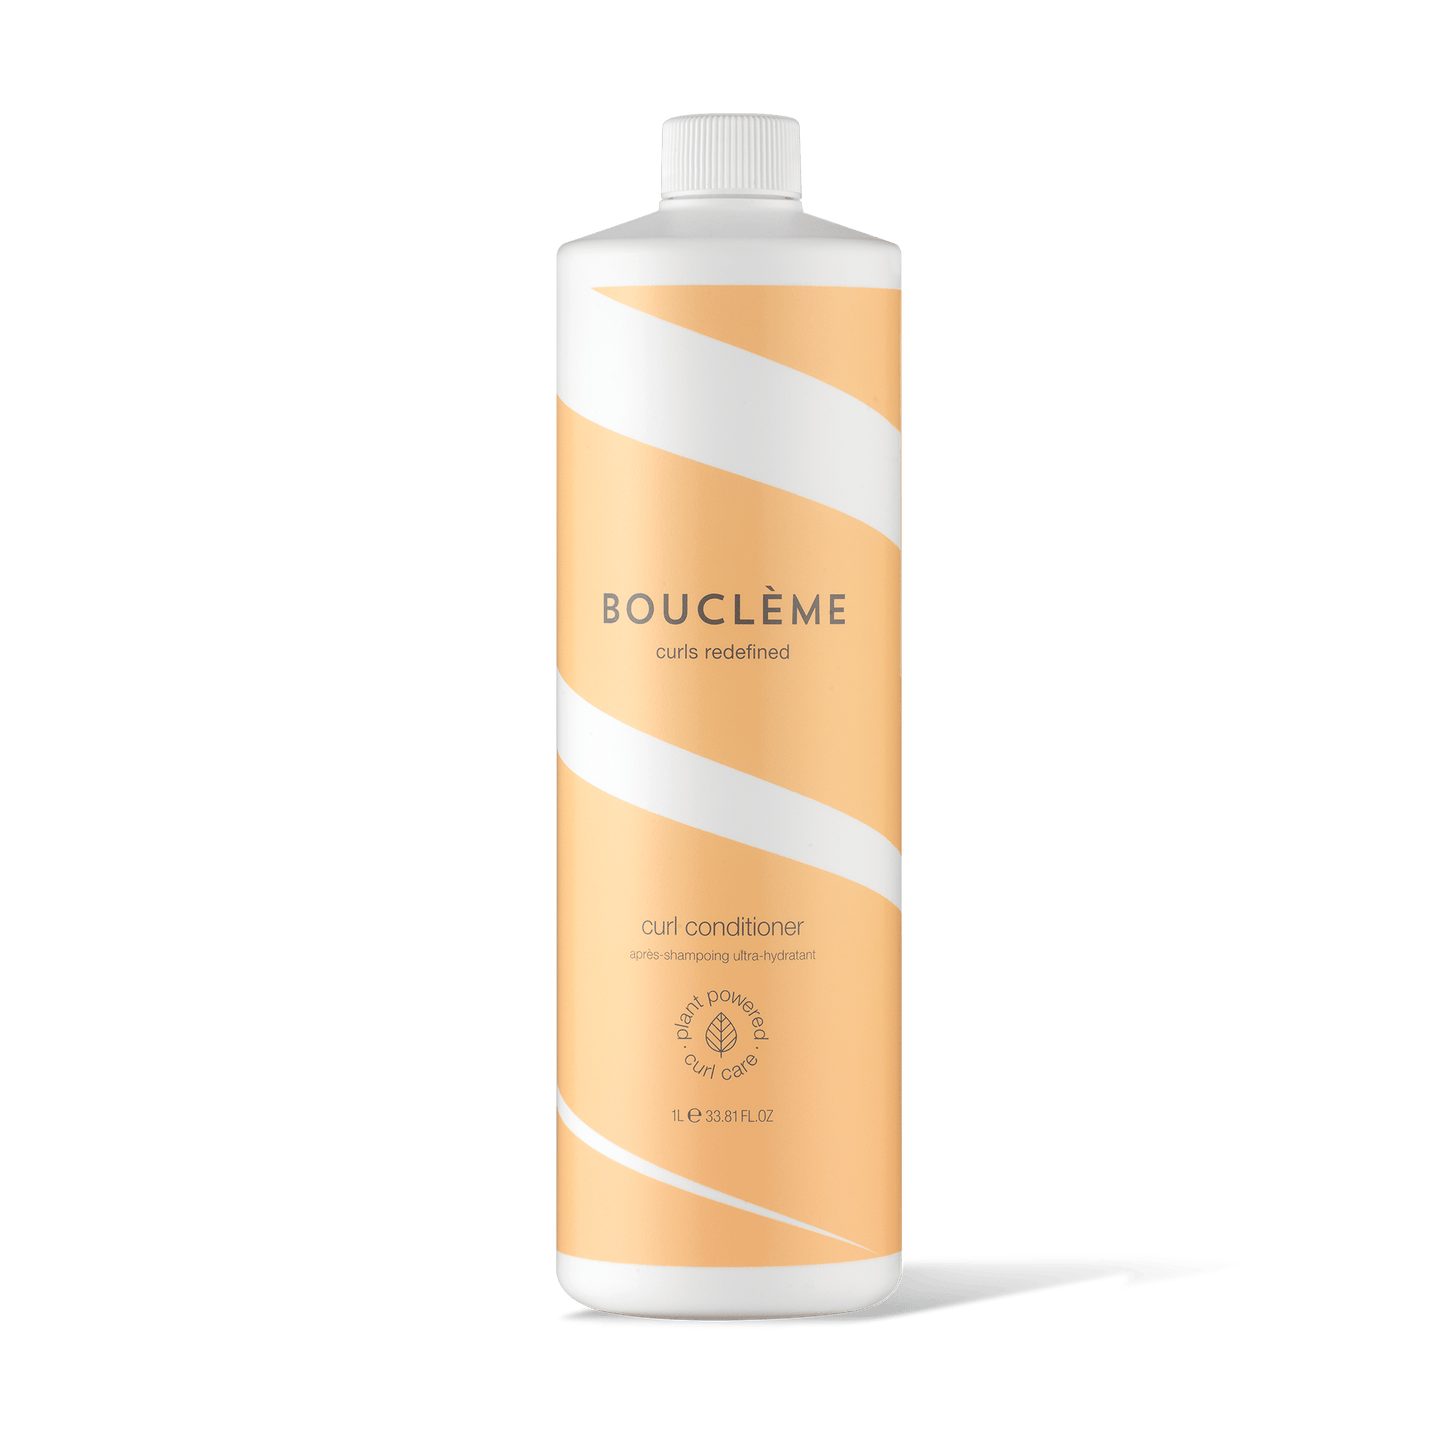 Created to quench curls, coils and waves its hydrating, lightweight formula softens strands, enhances definition and increases shine.